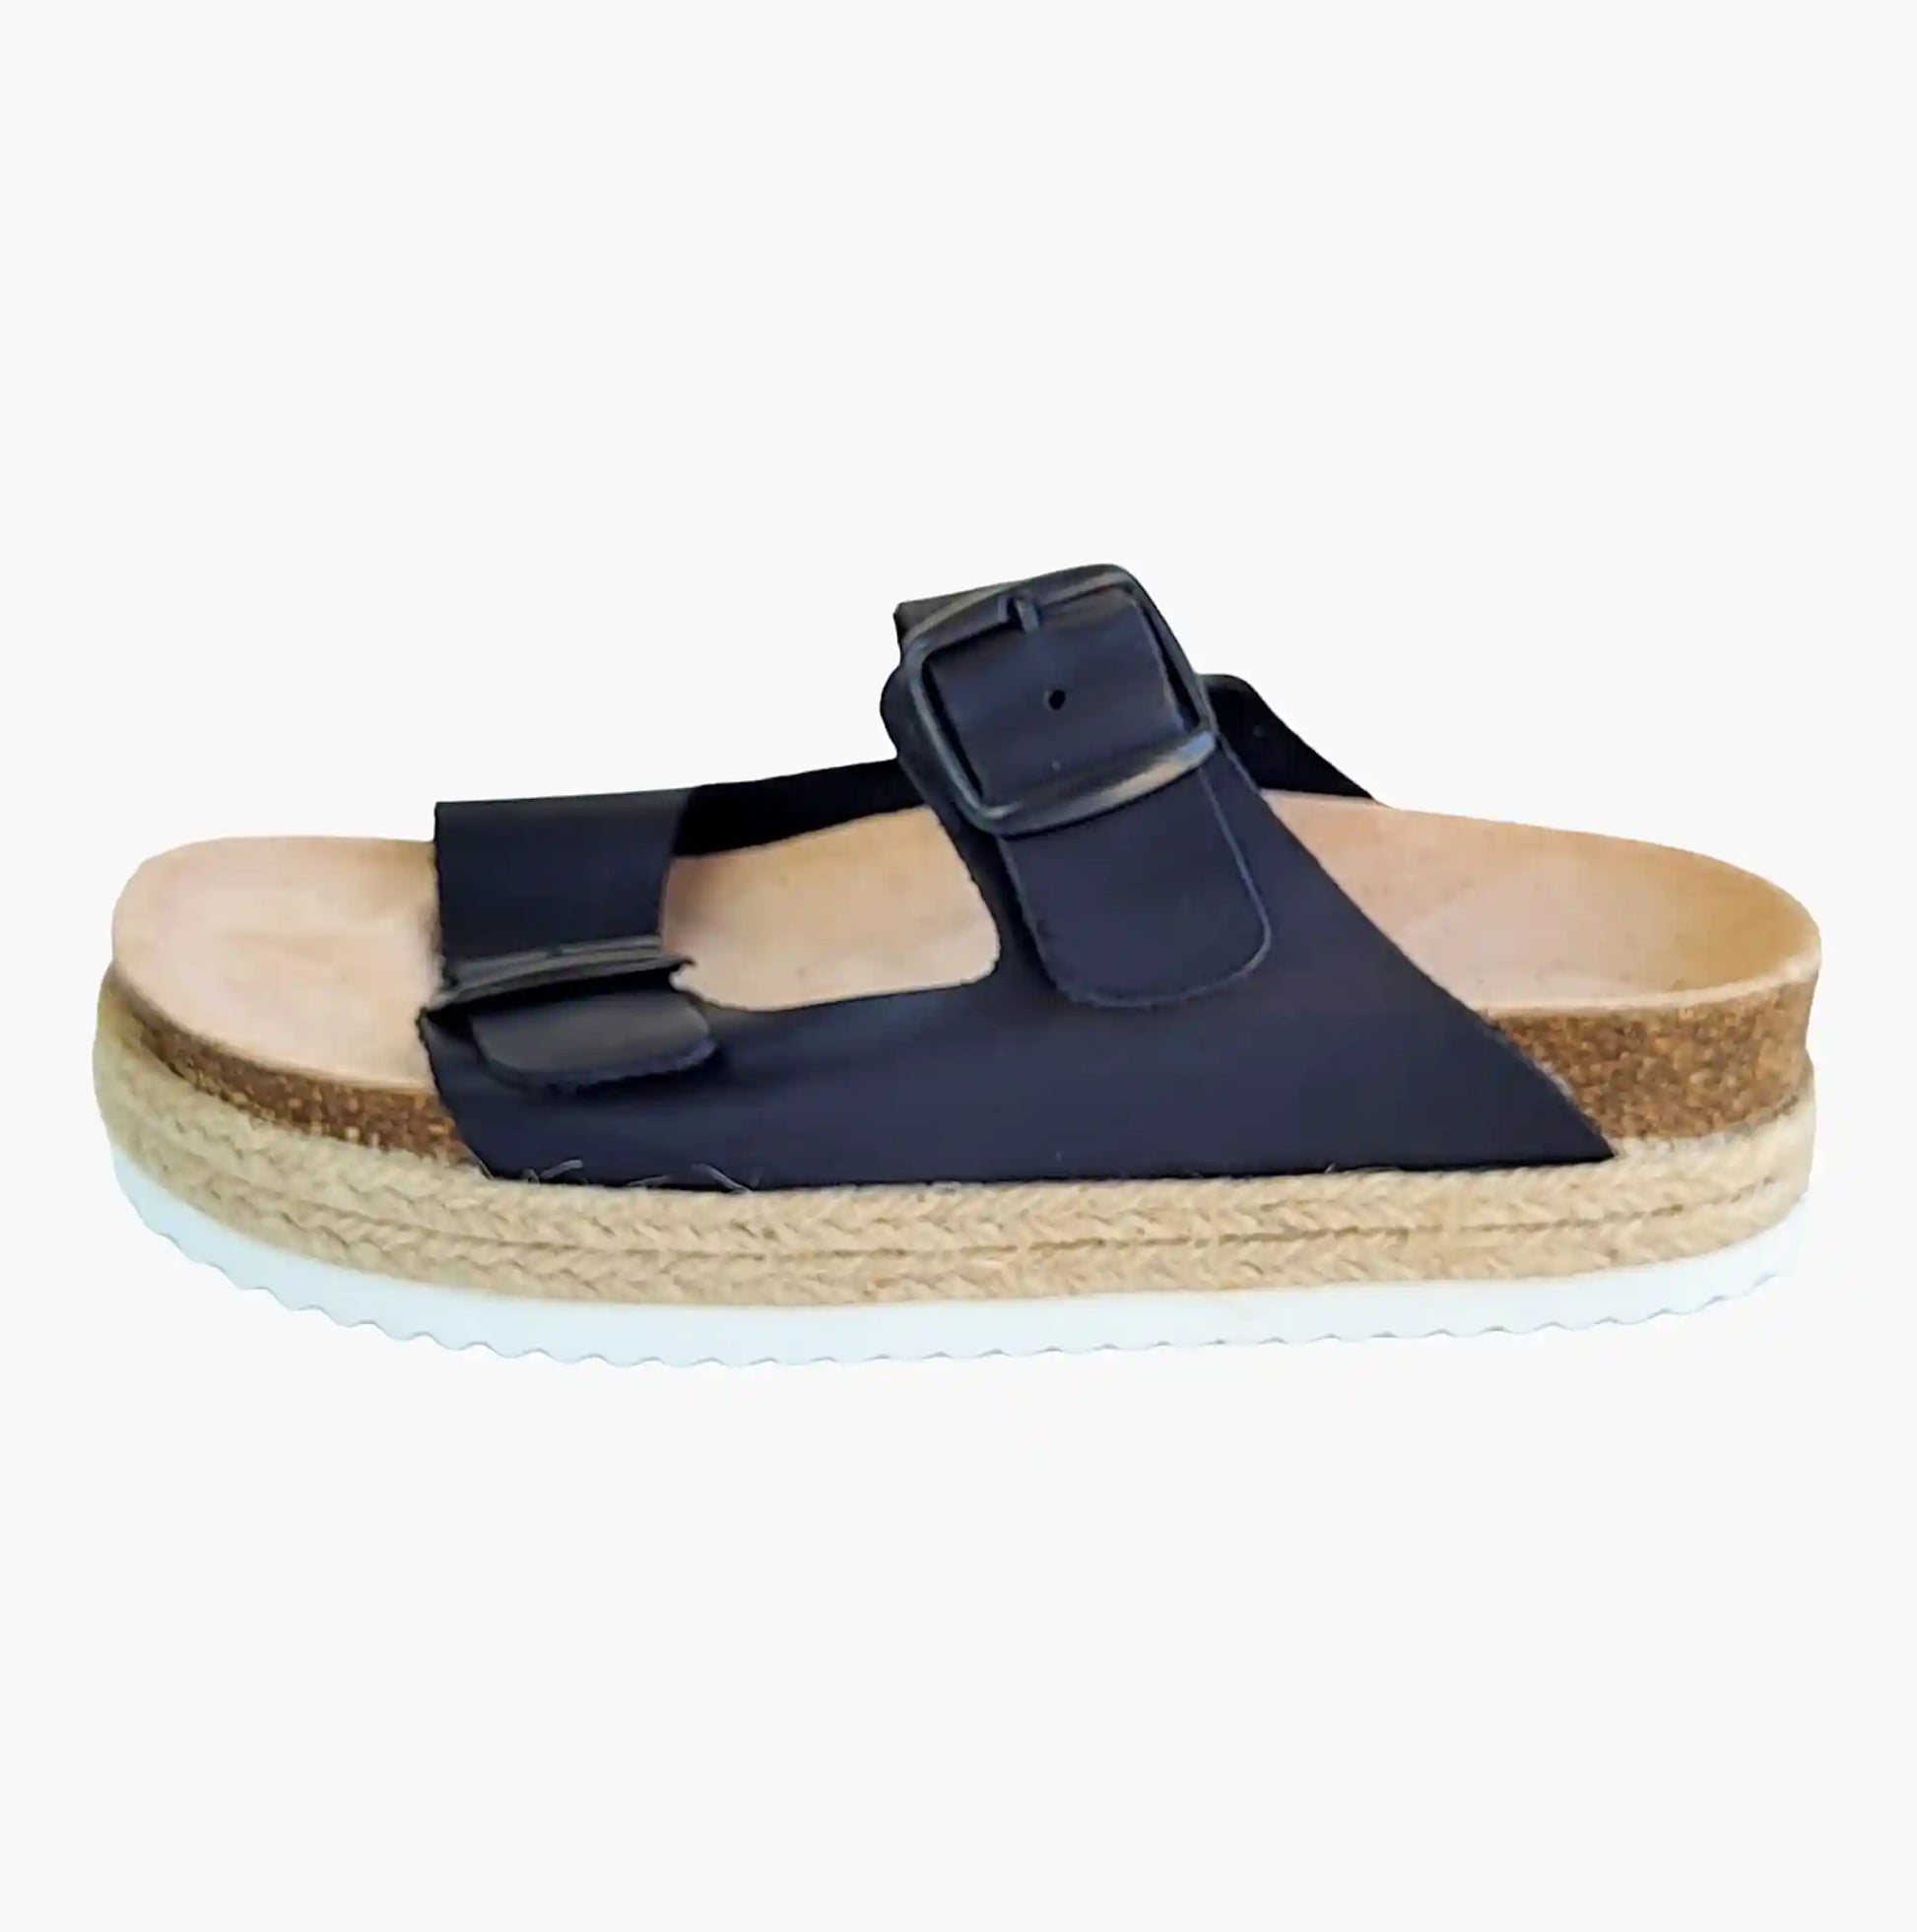 Sandals-Black-arch-support-double-buckle